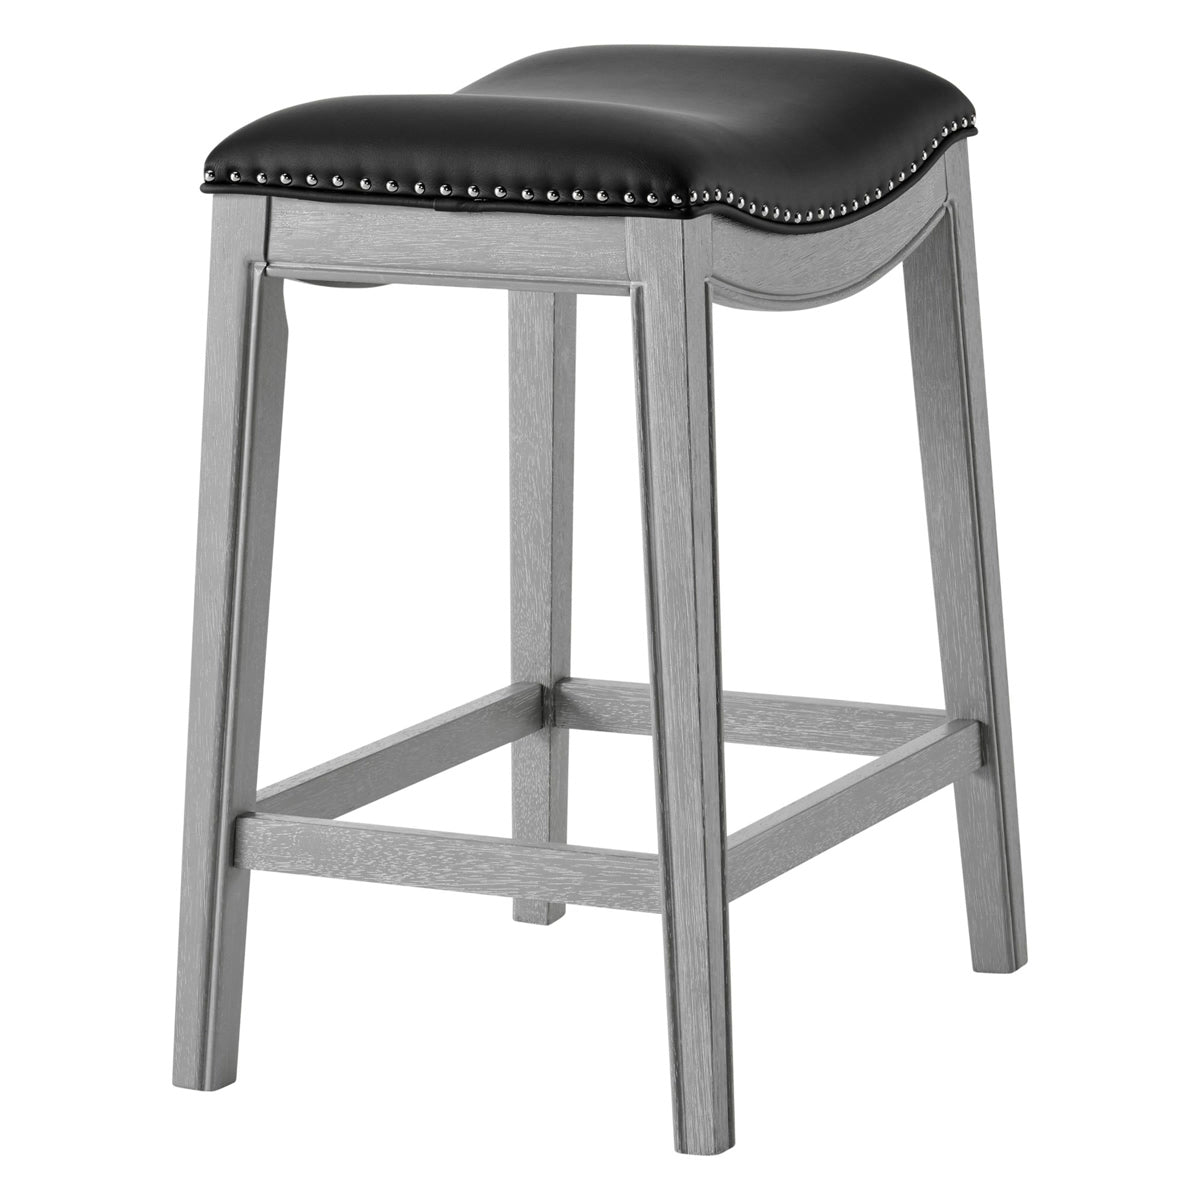 Grover PU Leather Counter Stool by New Pacific Direct - 1330001-387